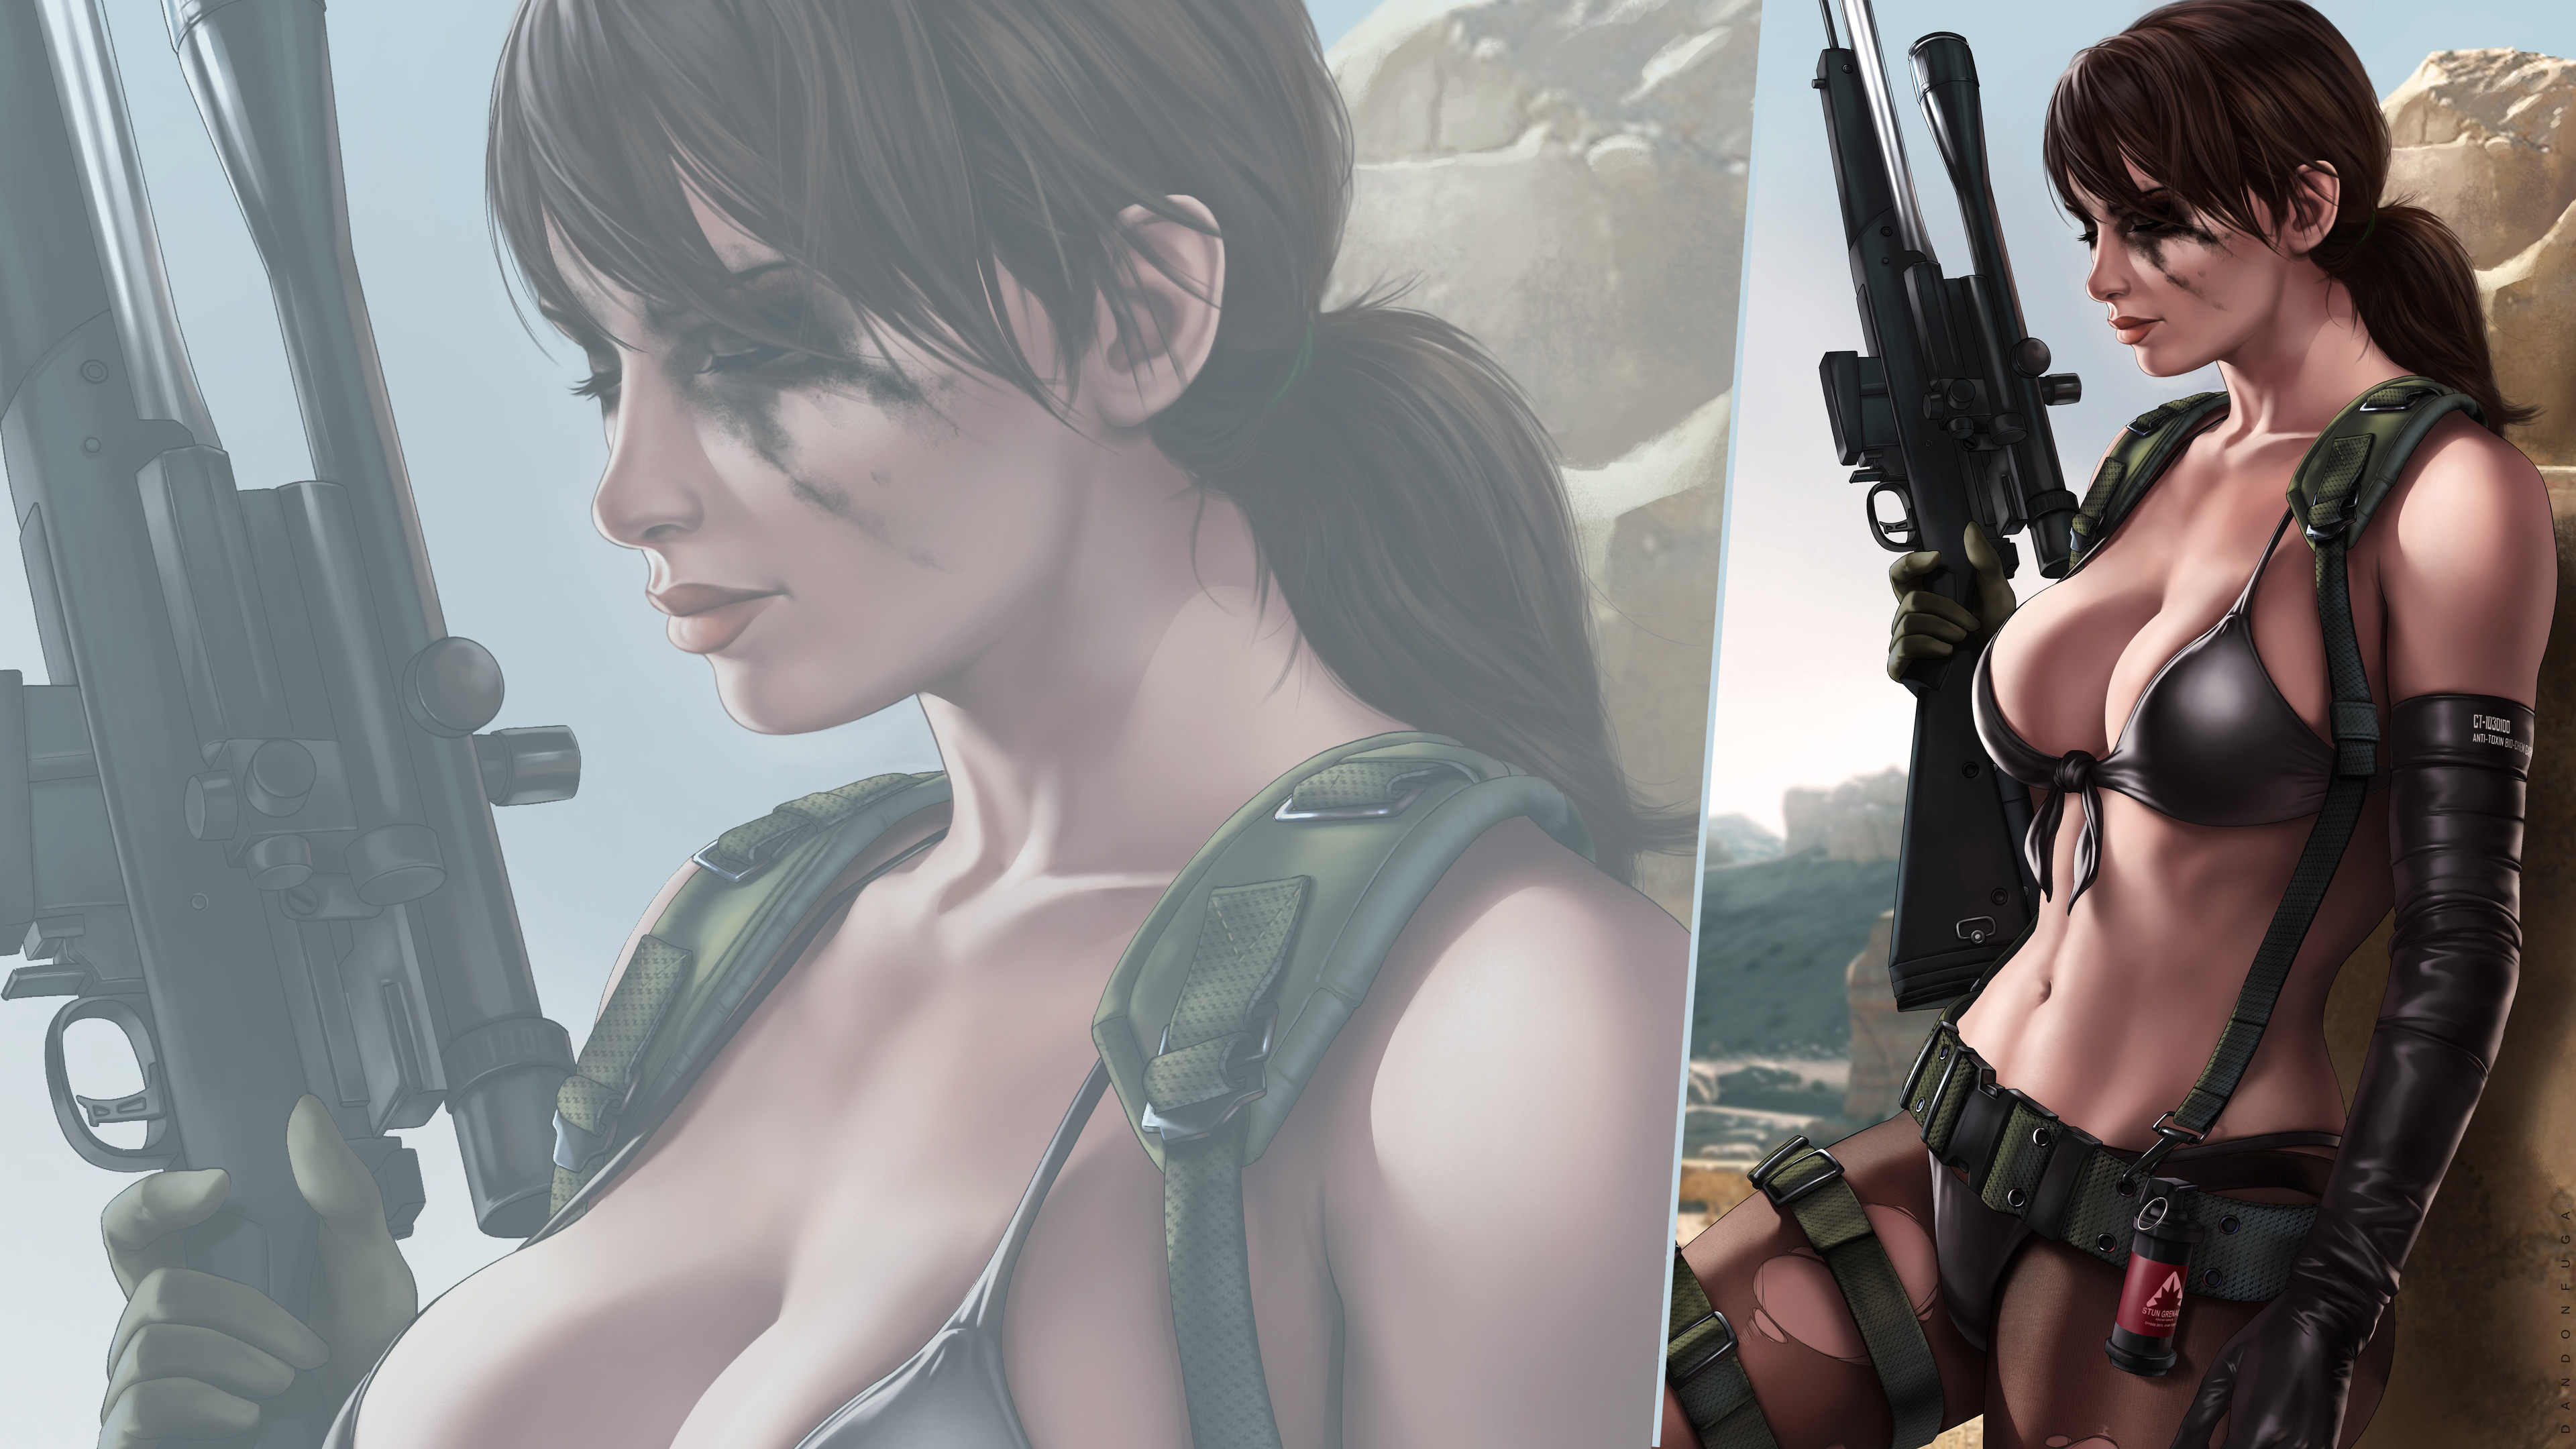 General 3840x2160 Quiet (metal gear) Metal Gear Solid V: The Phantom Pain video game characters gun digital art girls with guns cleavage closed mouth closed eyes big boobs elbow gloves pantyhose ponytail brunette makeup smiling scopes sniper rifle video game girls